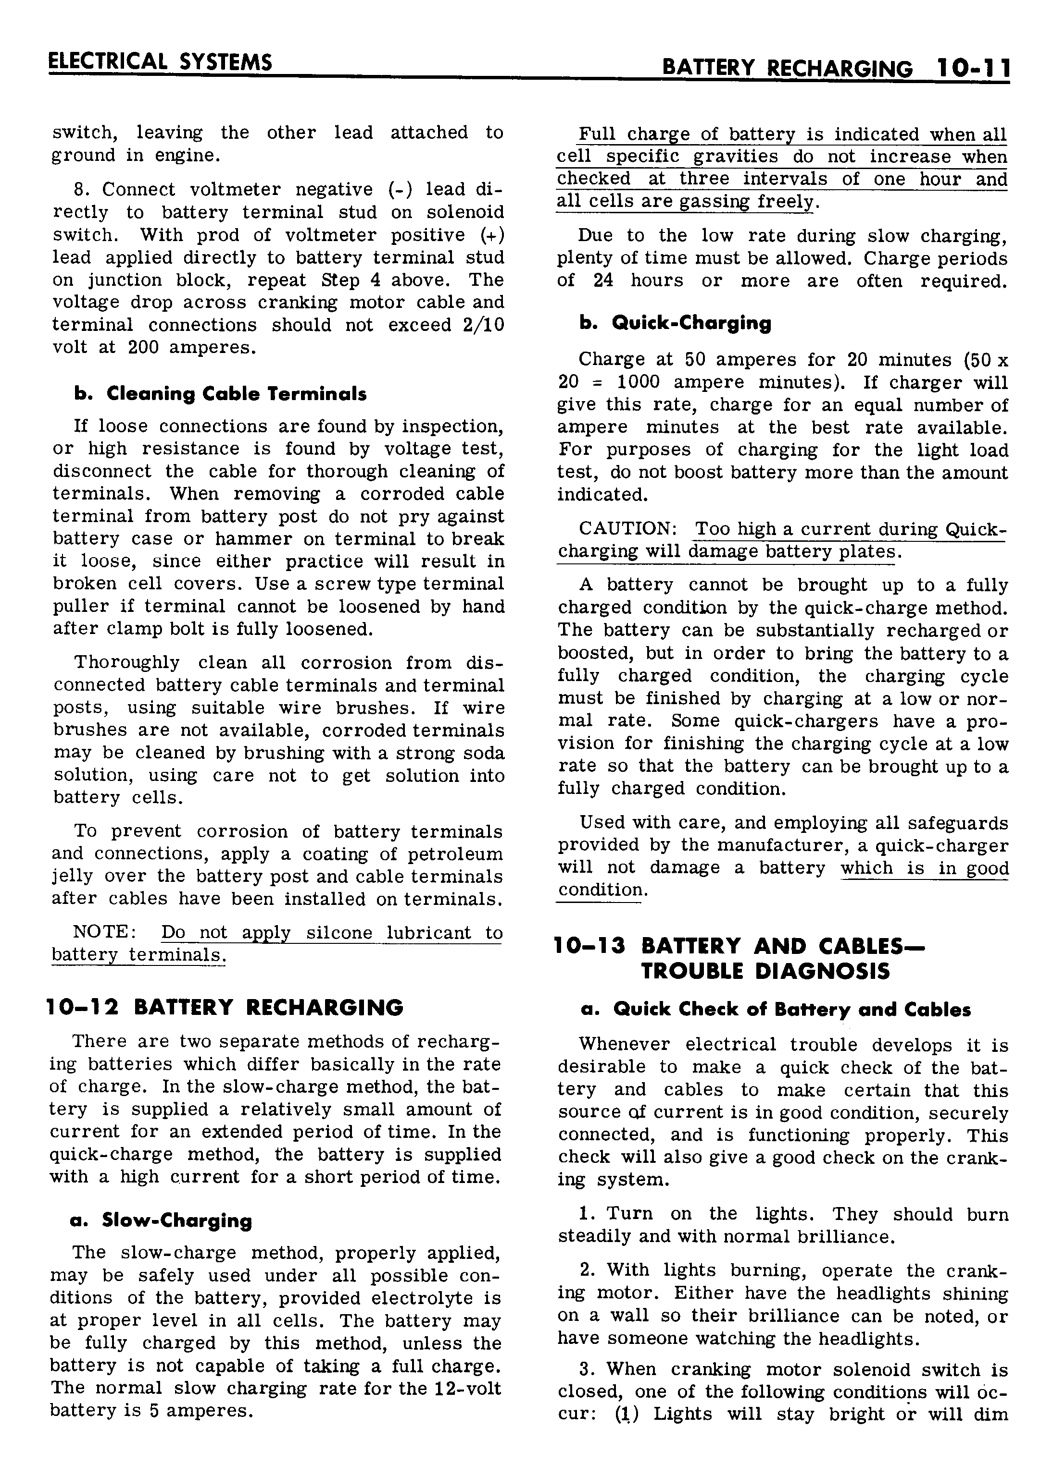 n_10 1961 Buick Shop Manual - Electrical Systems-011-011.jpg